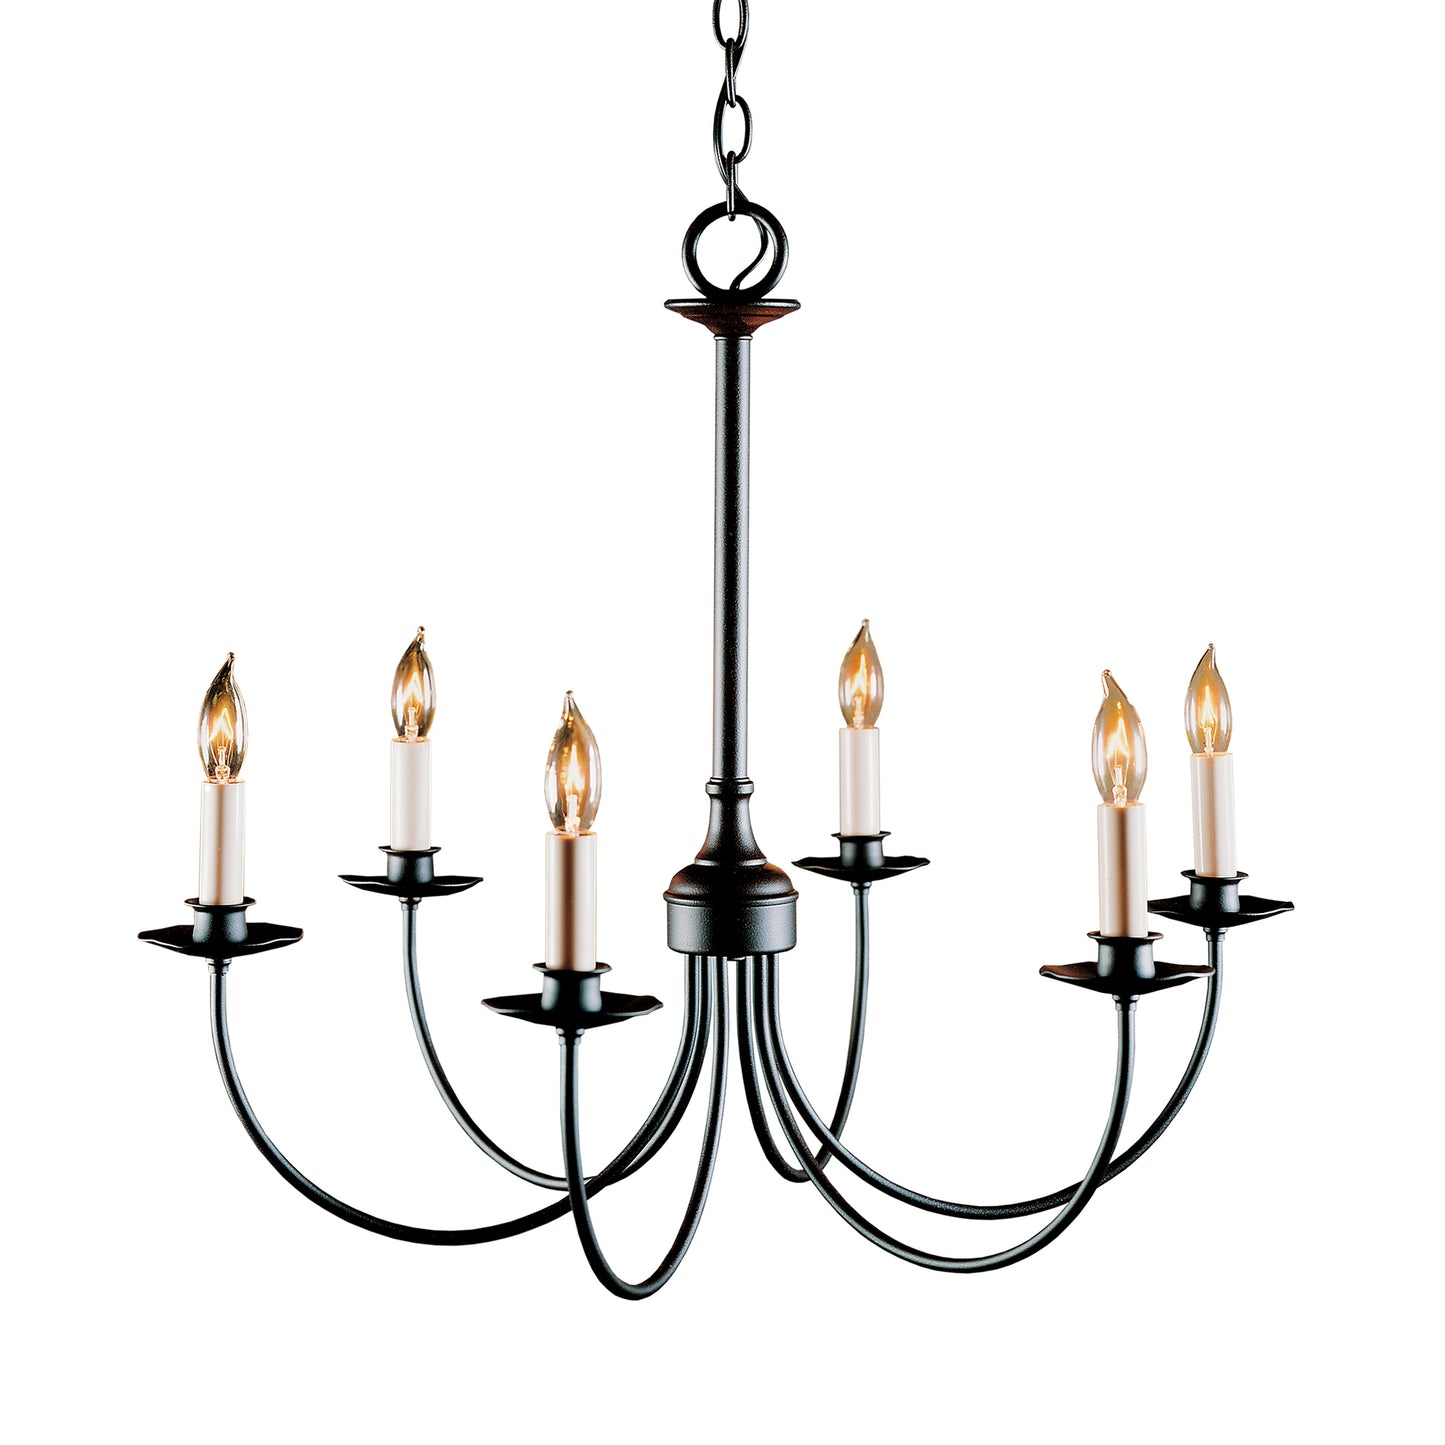 A Simple Lines 6-Arm Chandelier with six candles hanging from it, crafted by Hubbardton Forge.